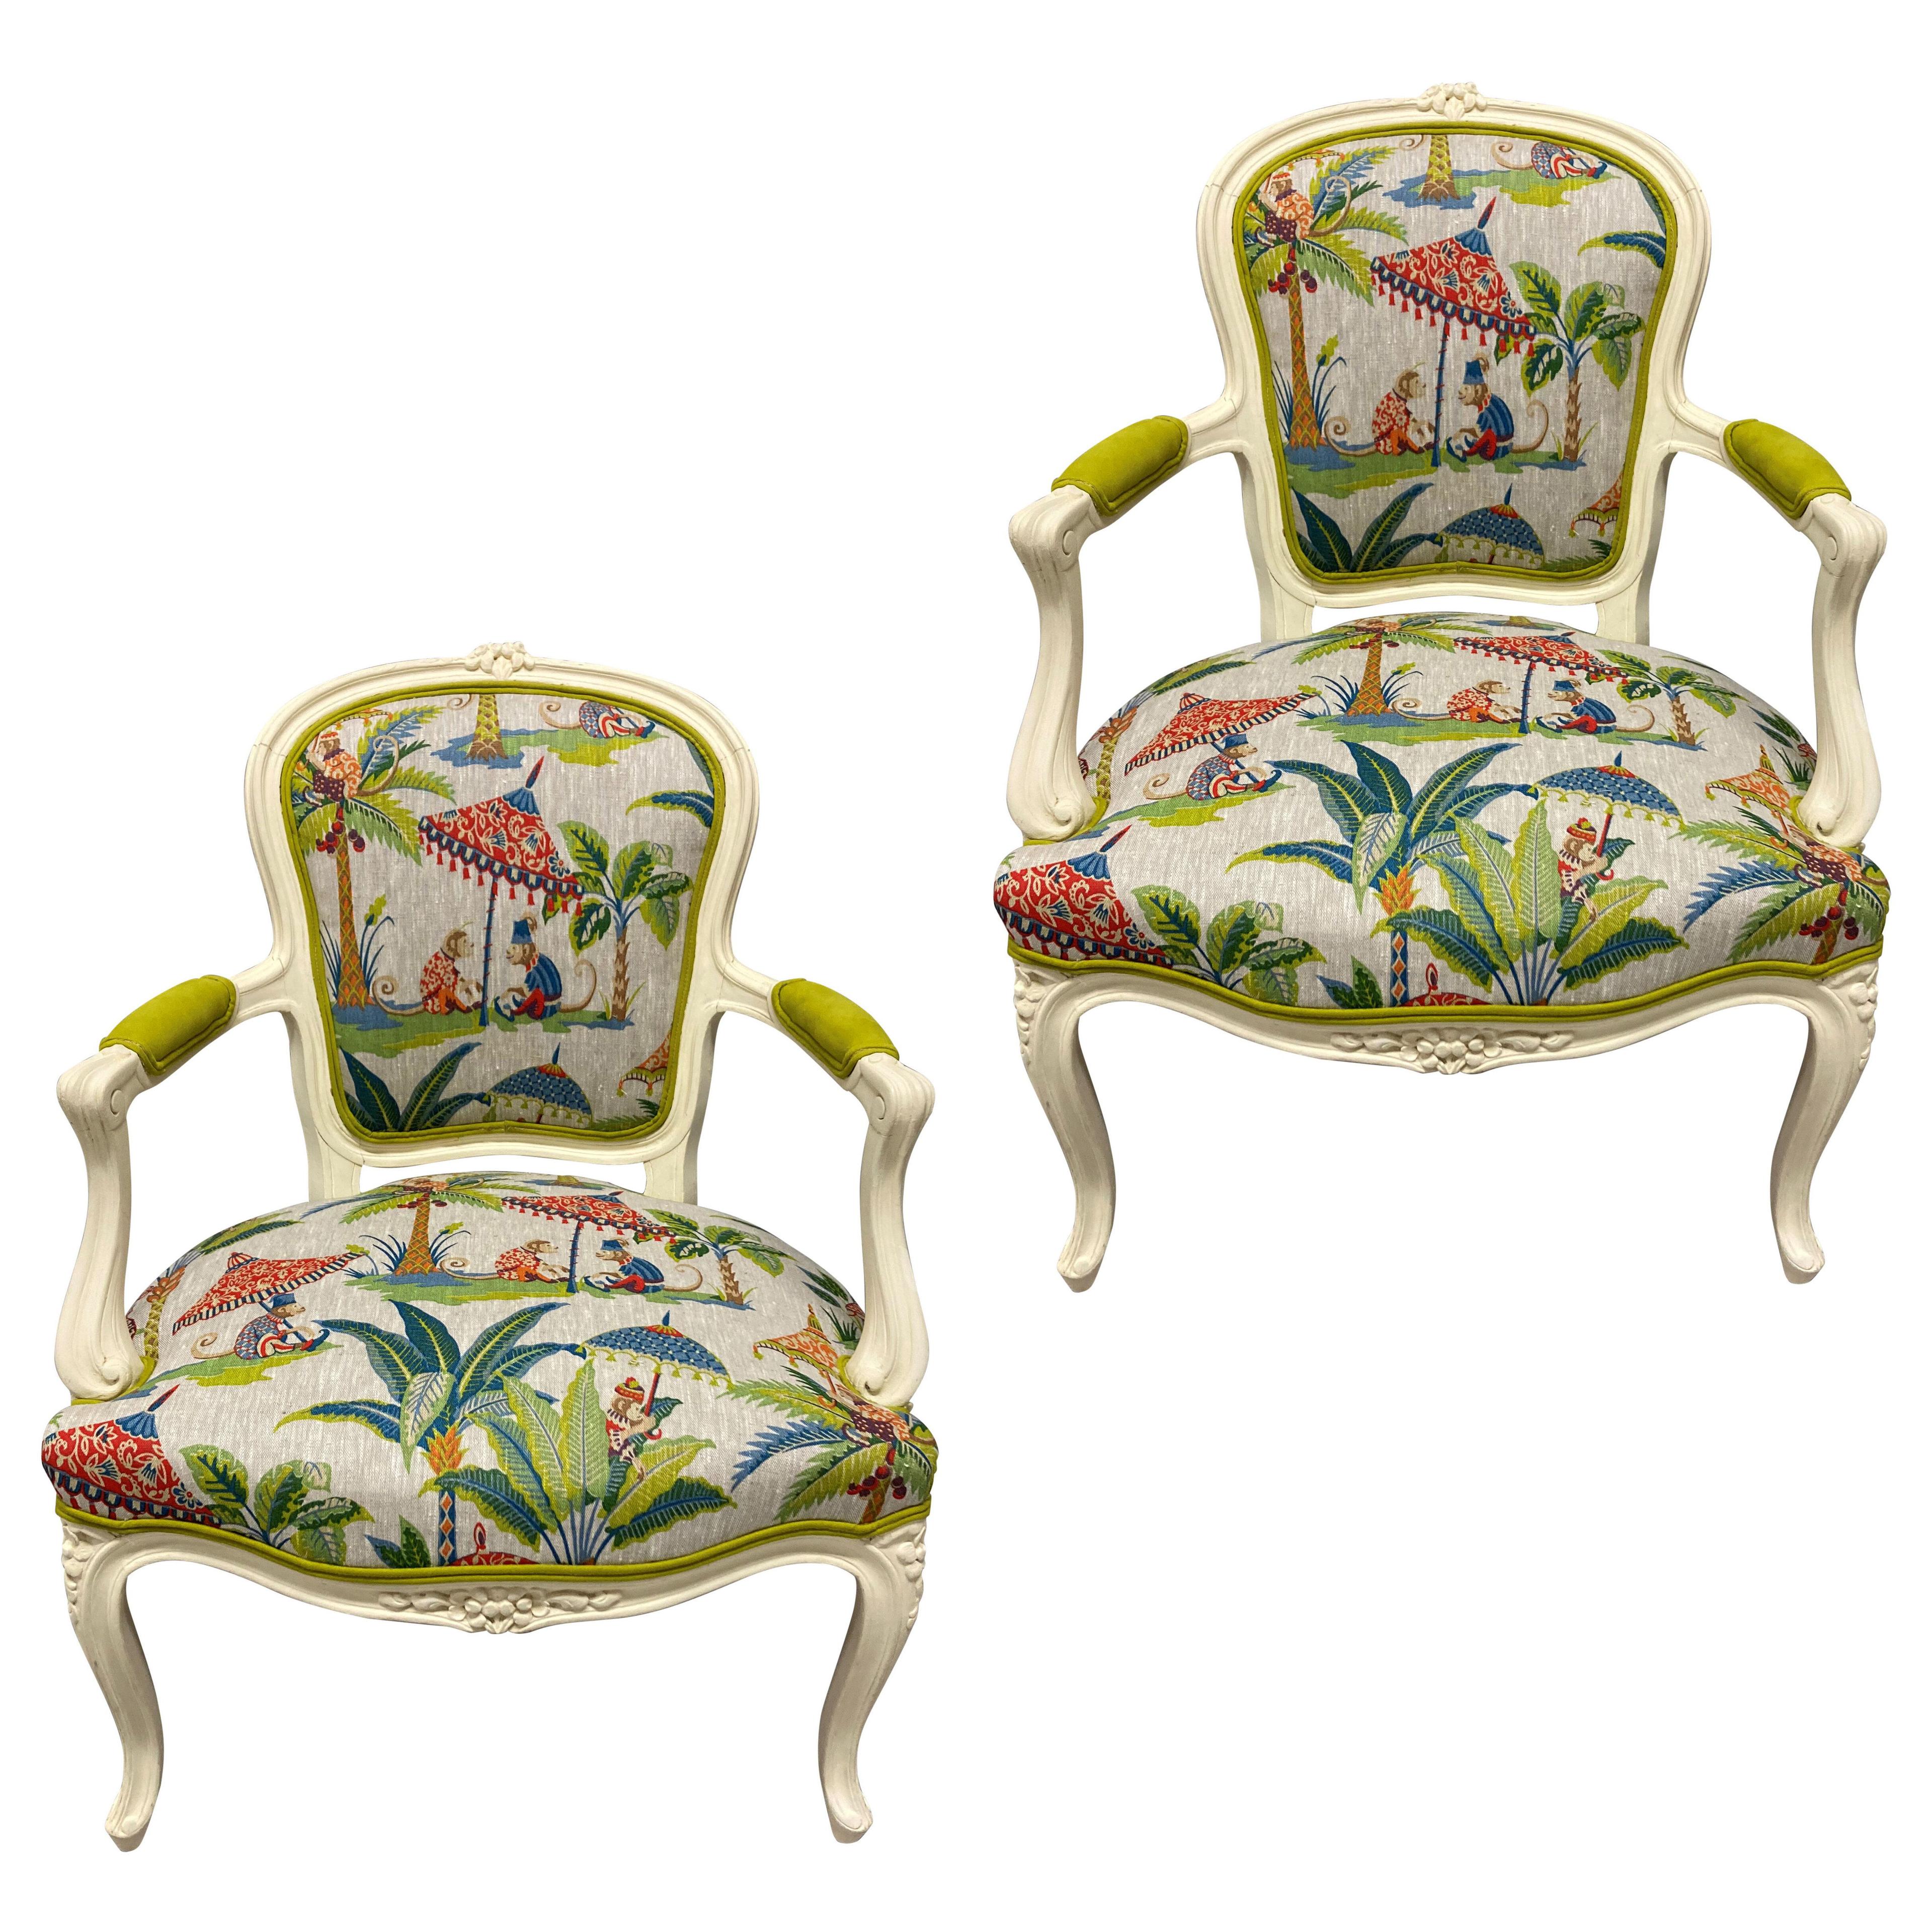 A PAIR OF LOUIS XV STYLE PAINTED ARMCHAIRS